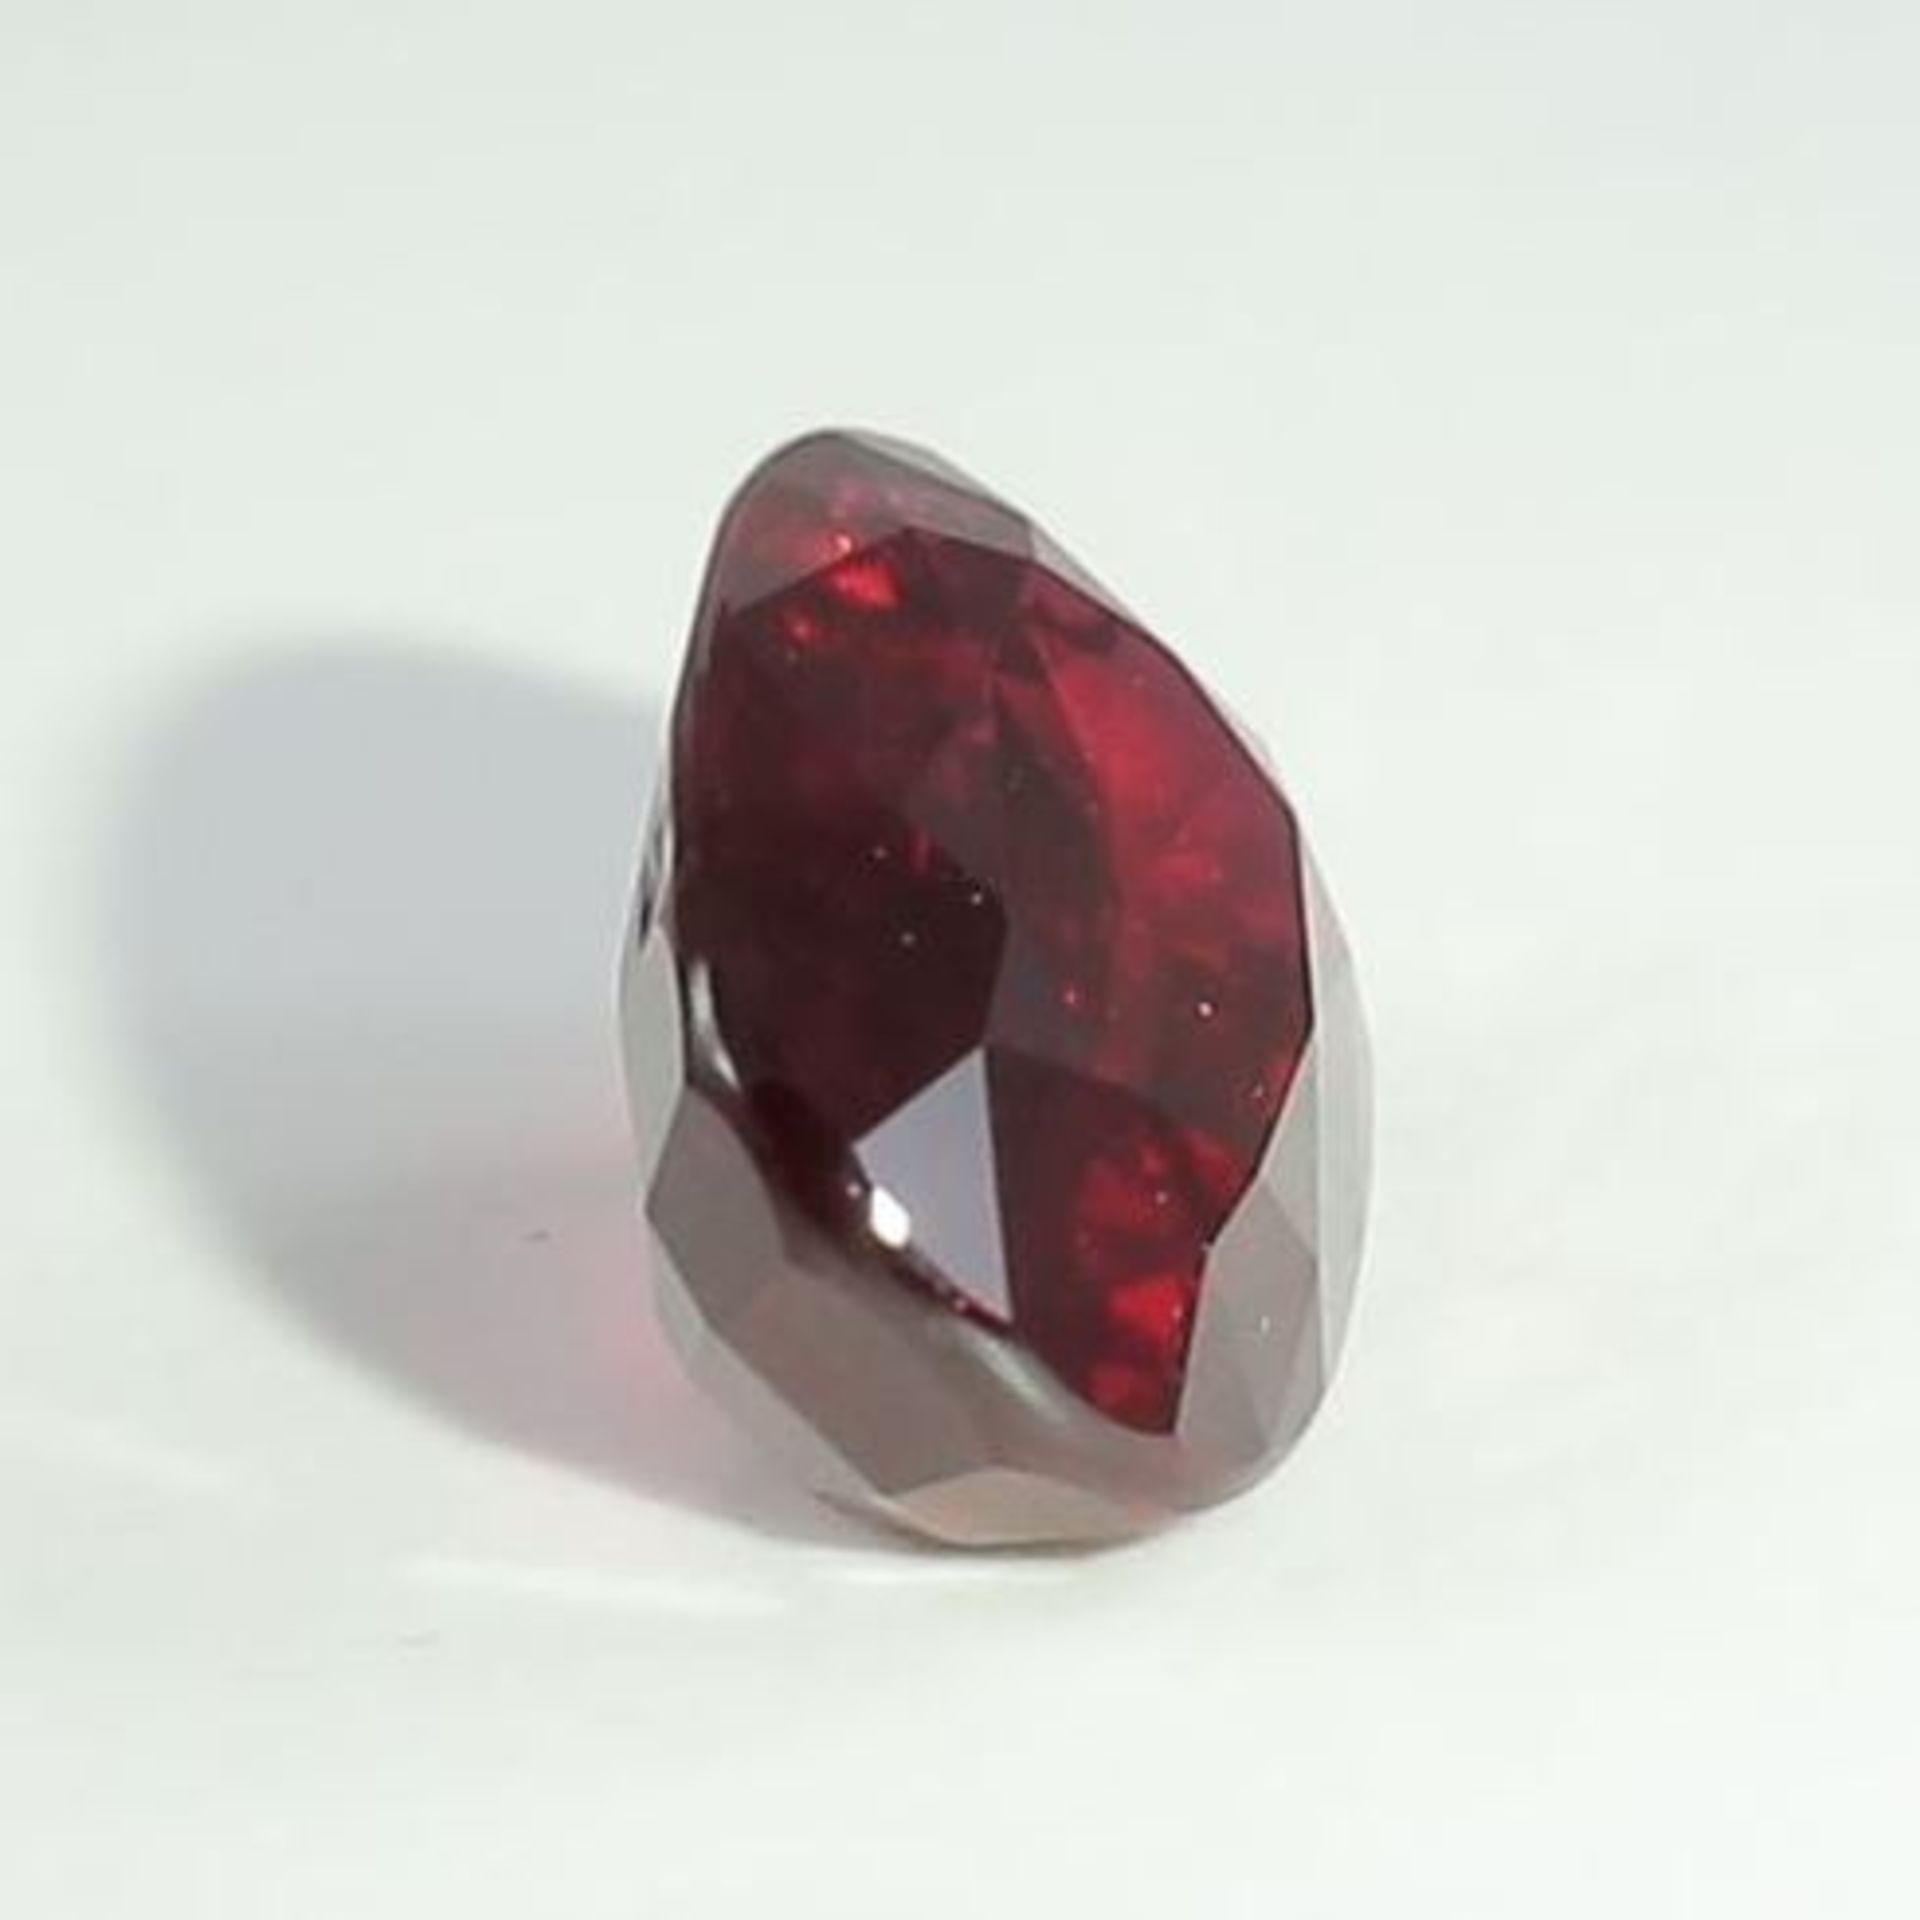 GRS Certified 5.02 ct. “Pigeon Blood” Ruby - Image 8 of 10